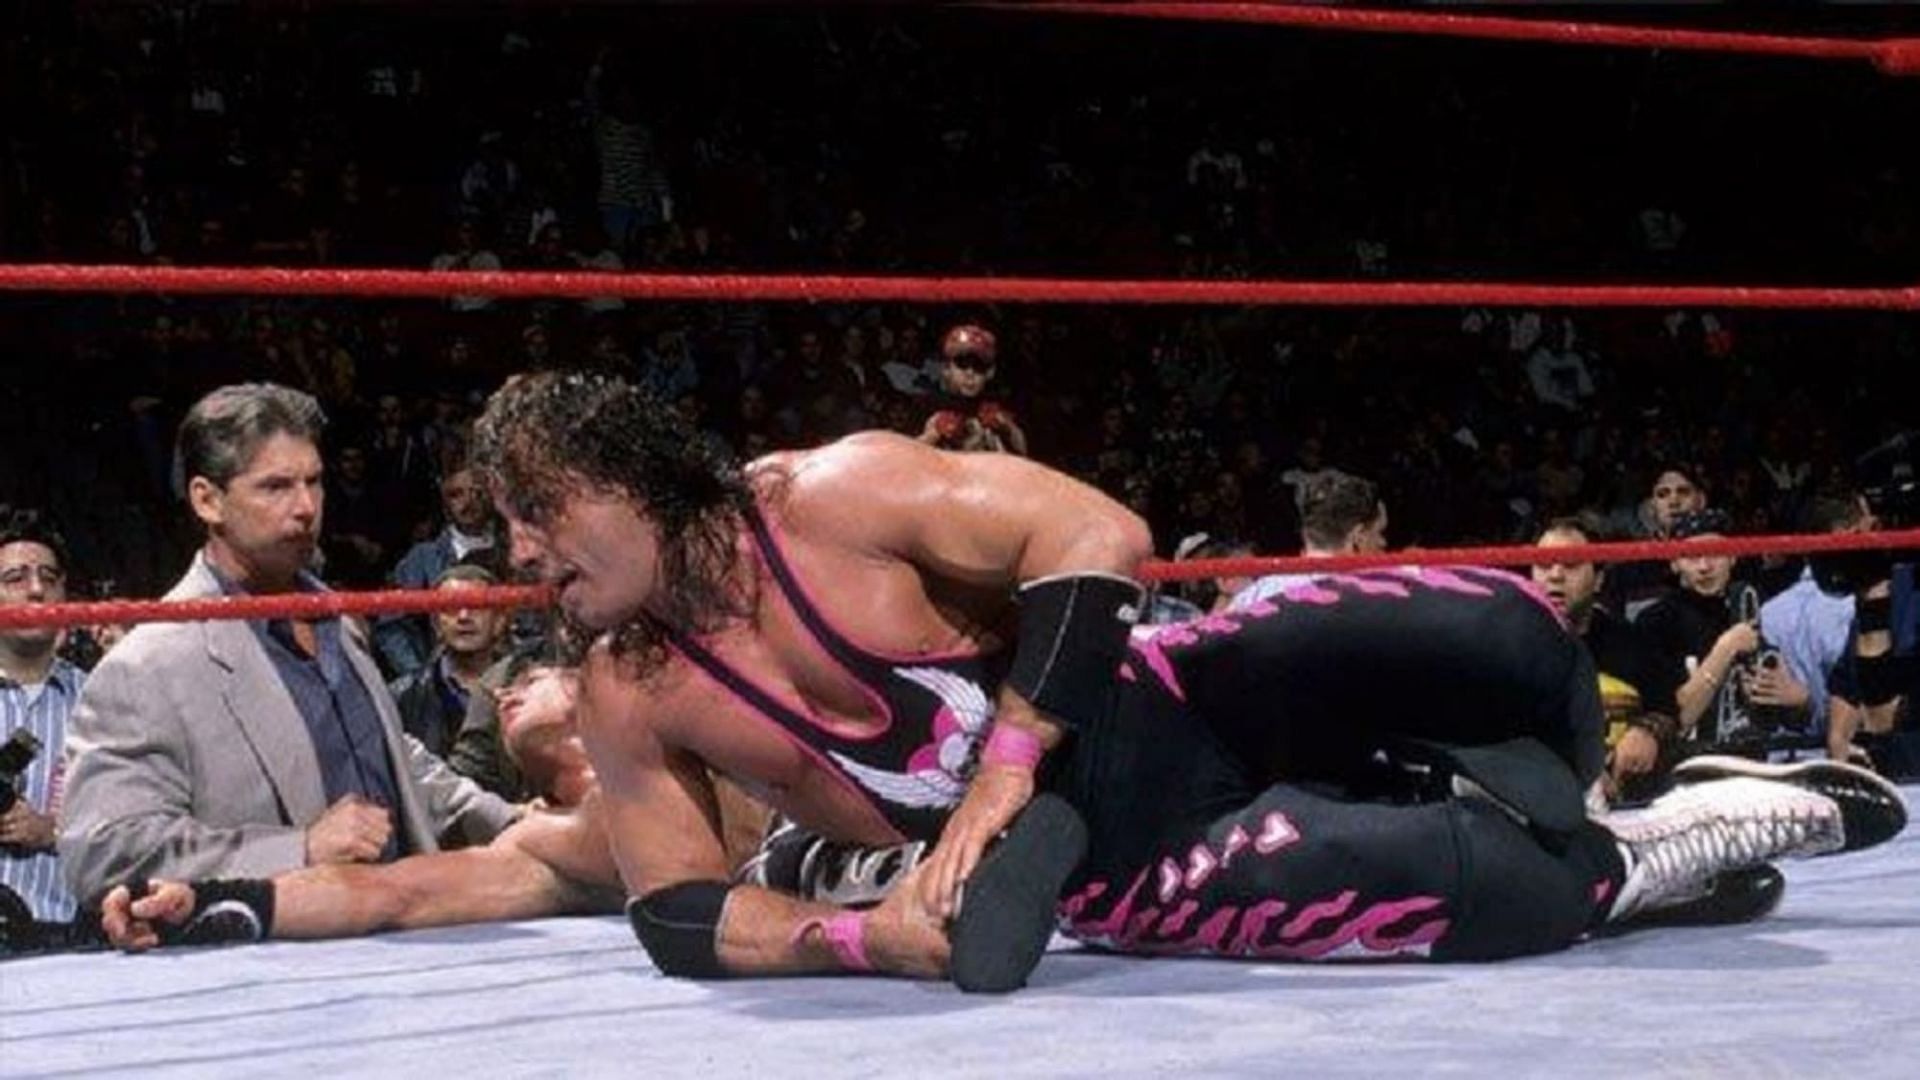 Bret &quot;Hitman&quot; Hart following what became known as the Montreal Screwjob